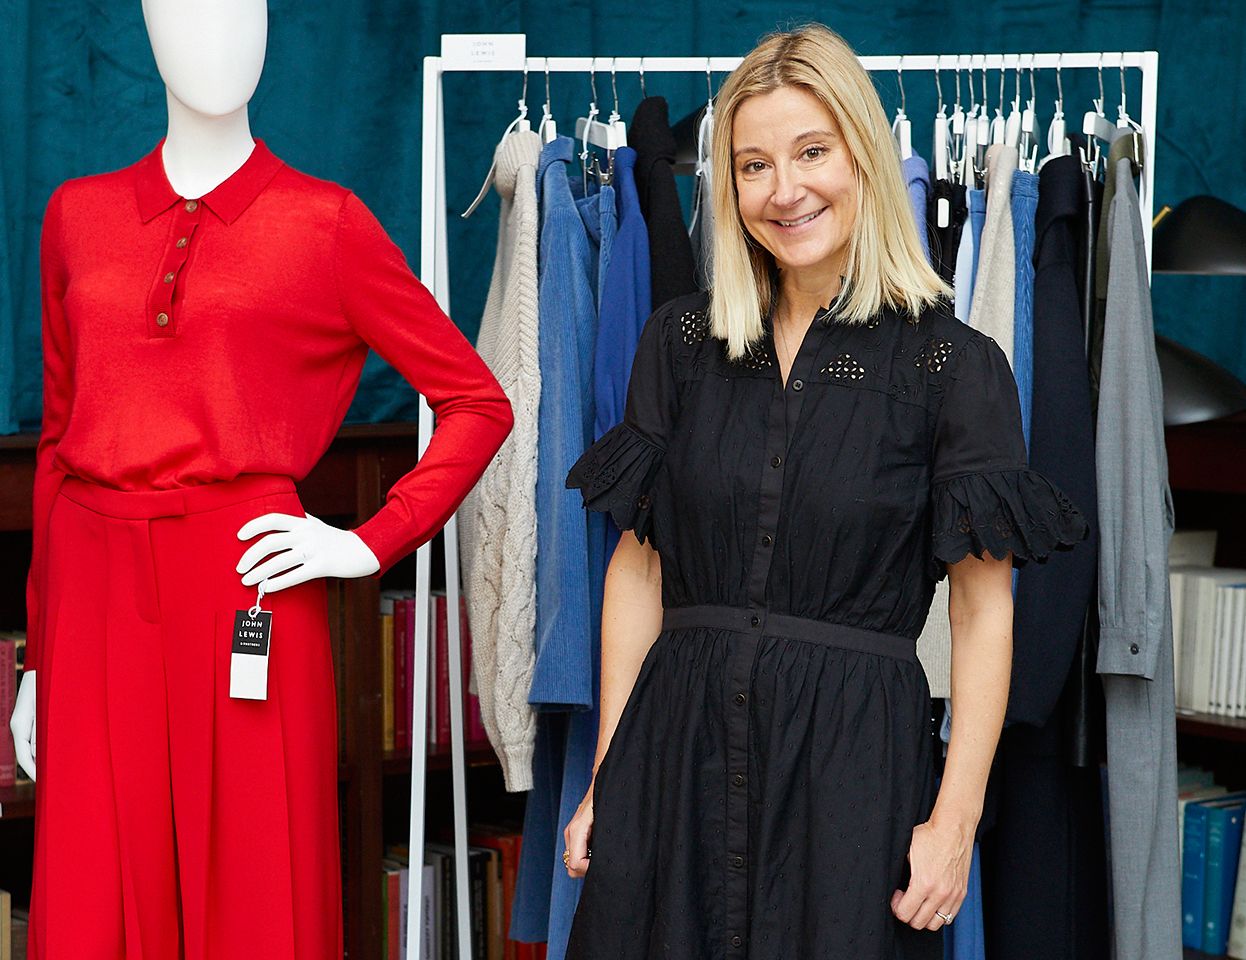 Oonagh Brennan's discusses her key buys for autumn/winter 2019